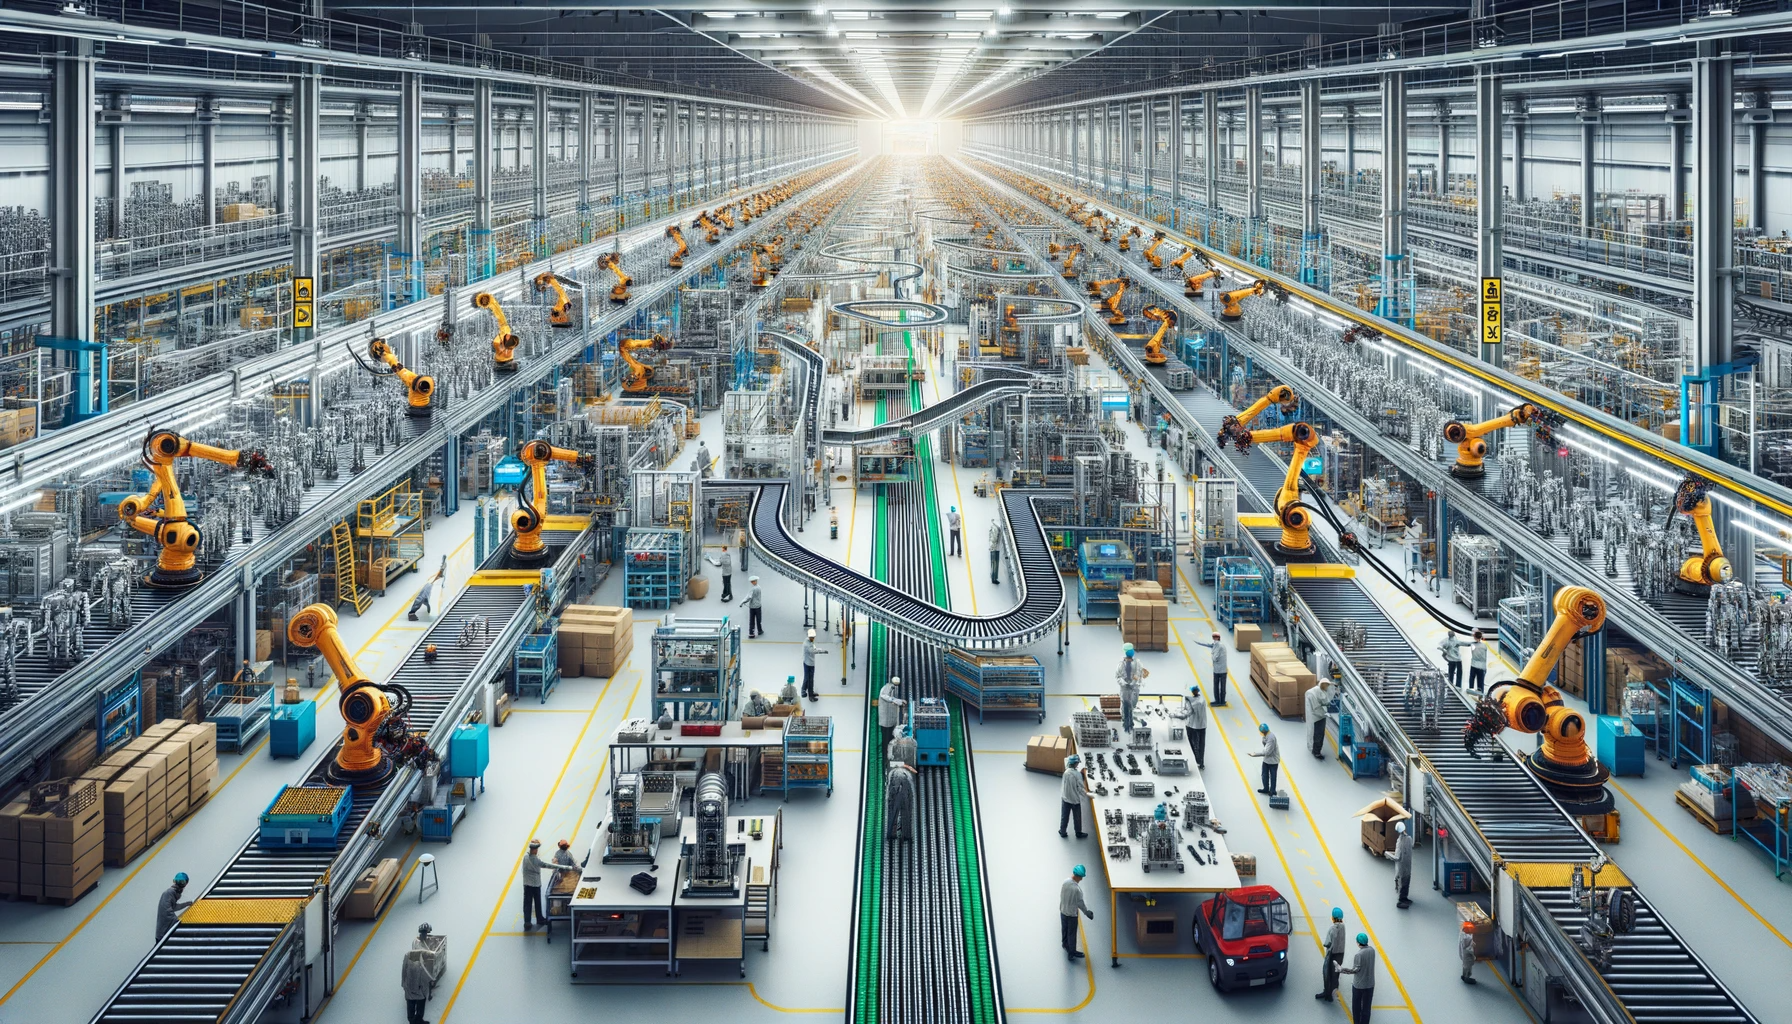 DALL·E 2023-11-02 14.14.57 - Wide photo of a spacious, bustling robot manufacturing facility. Stretched conveyor belts transport elongated robot parts, workers of diverse descent